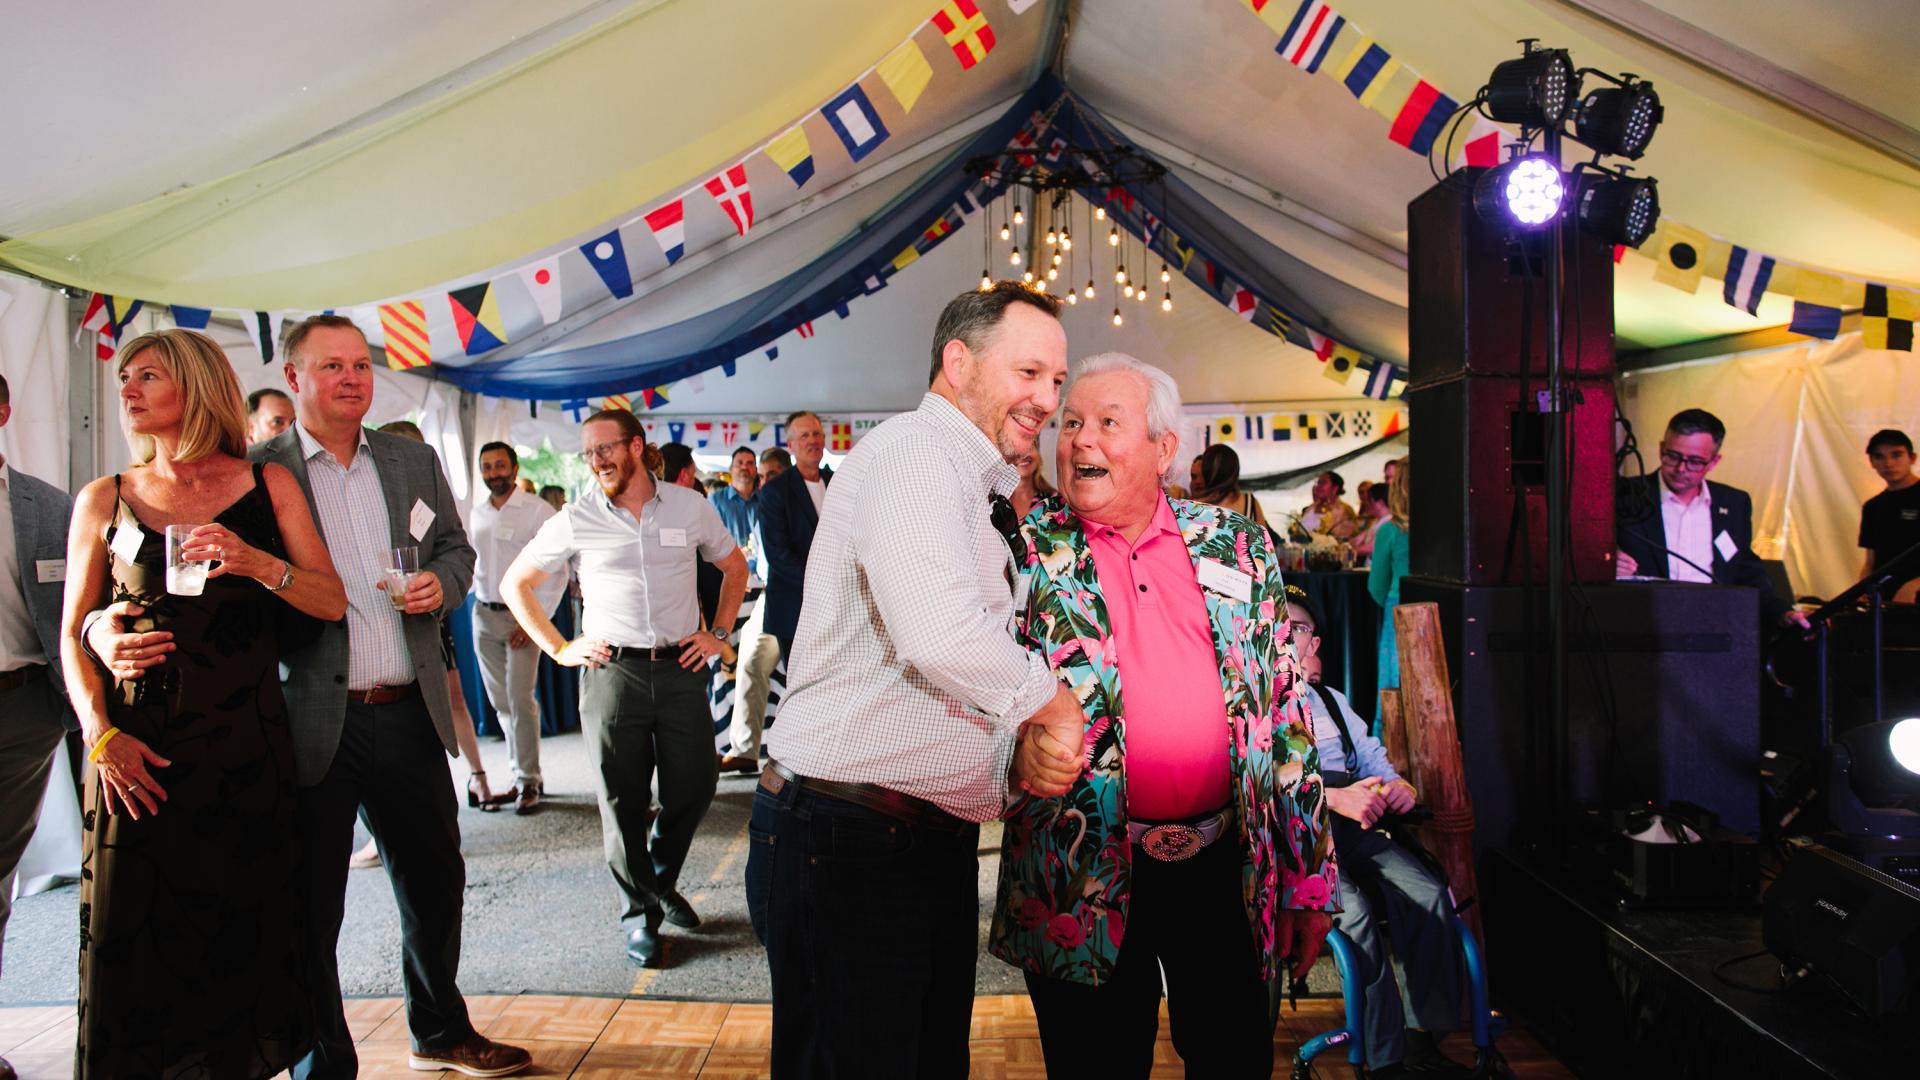 Man with pink shirt and colorful jacket shaking hands with another Event on Main attendee under a tent with nautical decorations